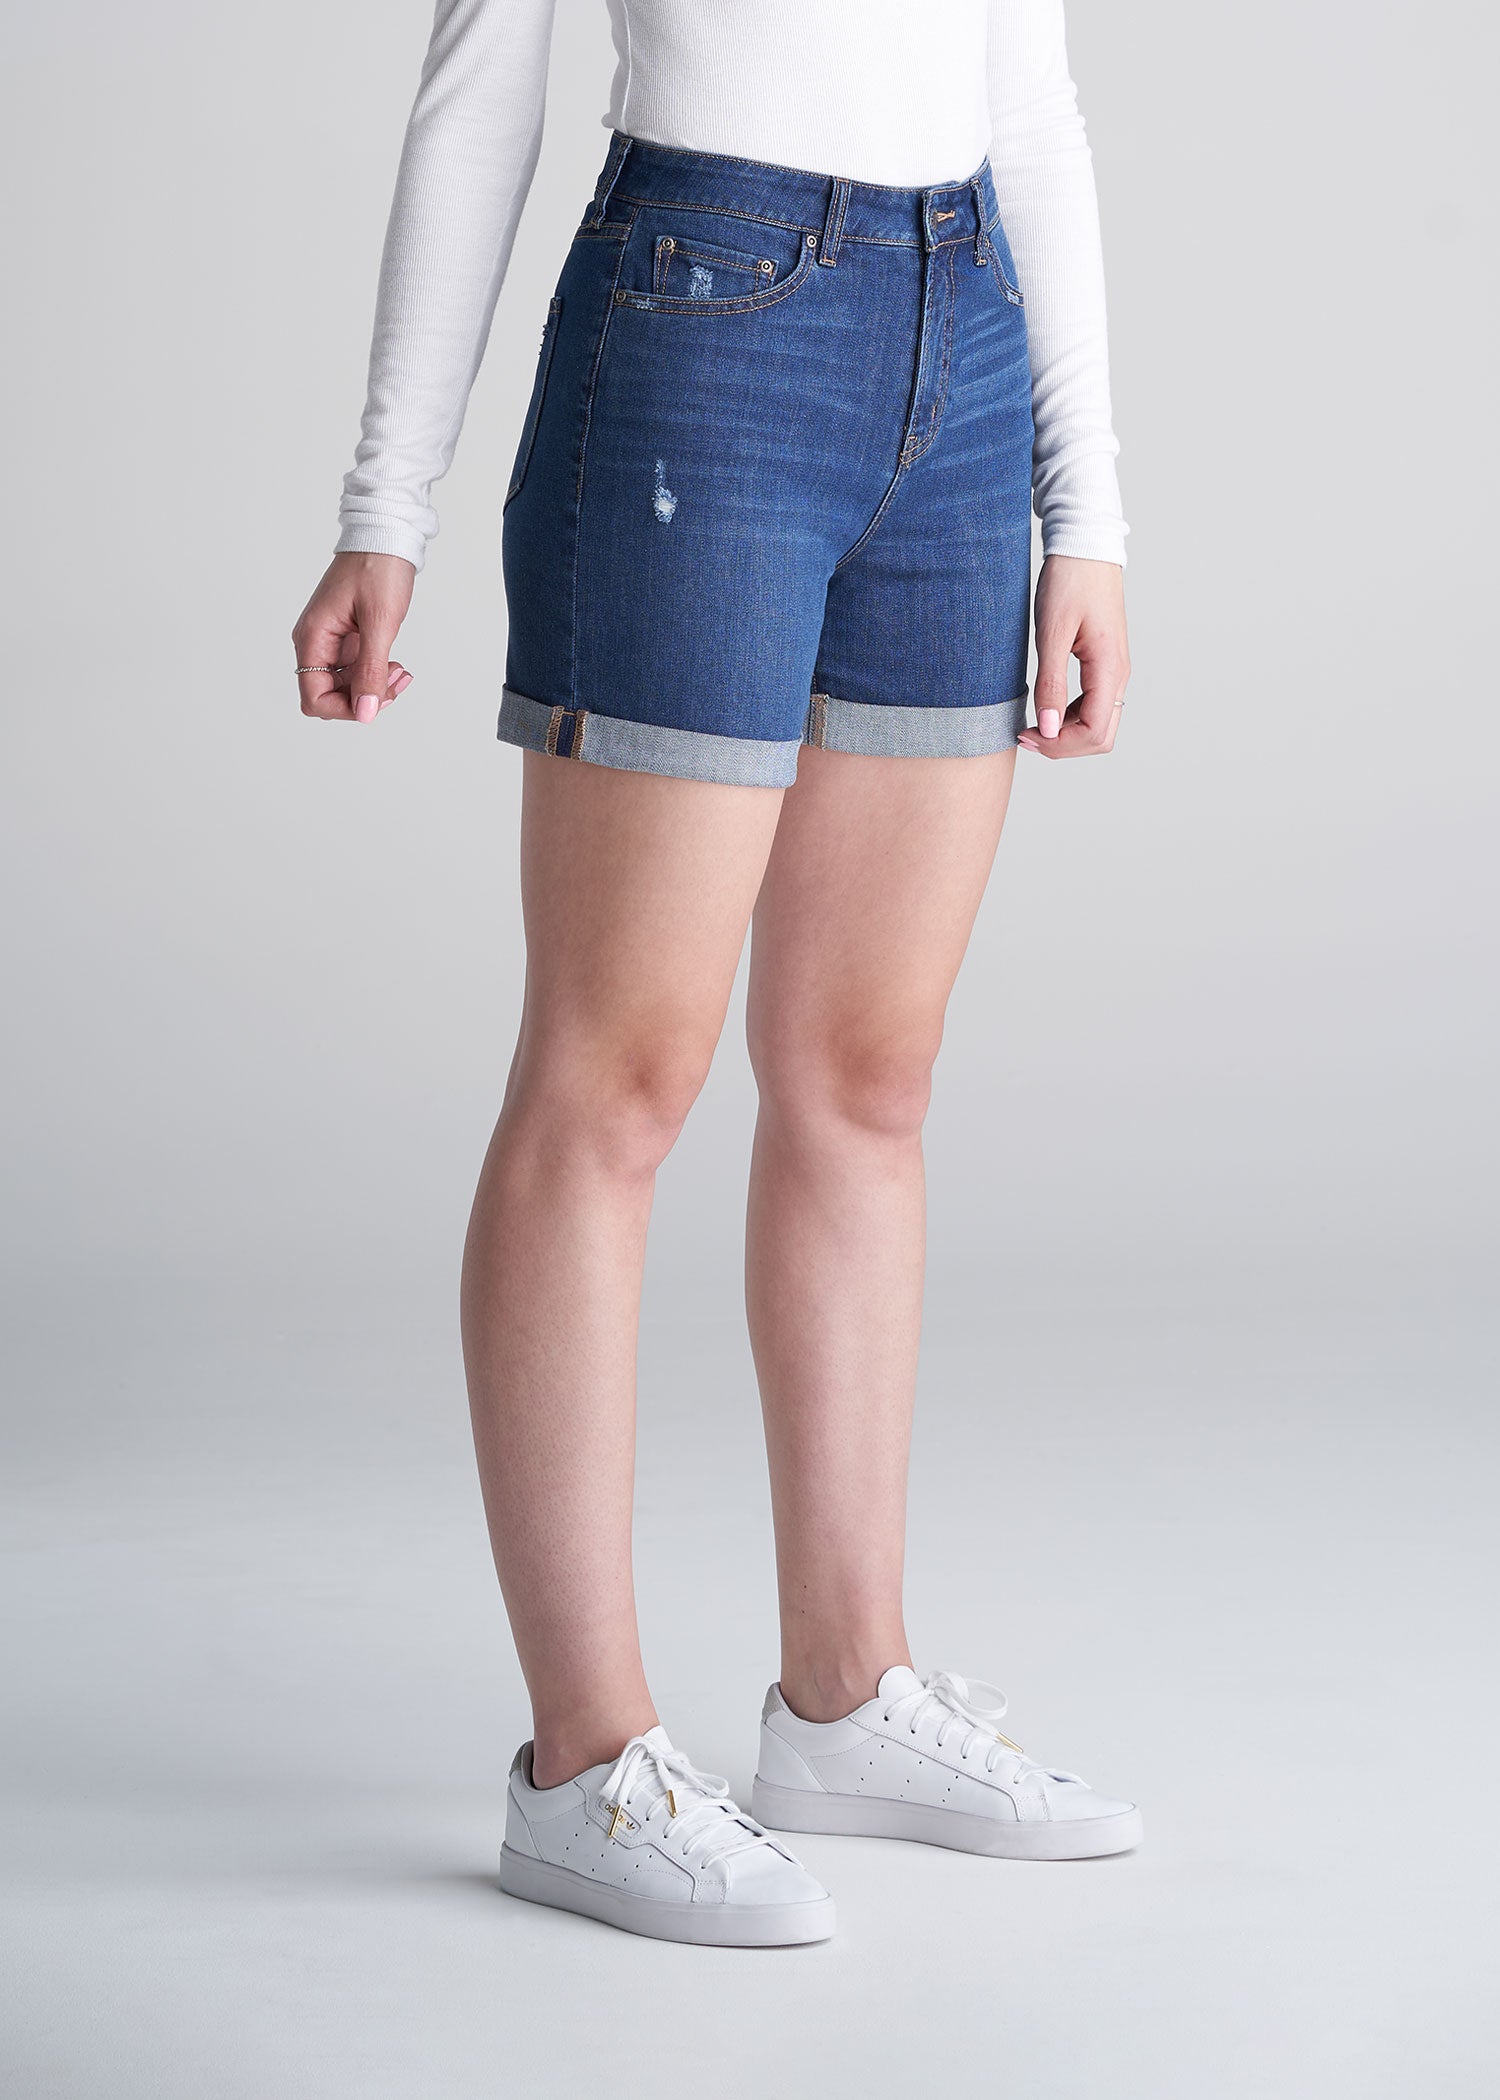 appetite compile wooden Denim Shorts for Tall Women | American Tall